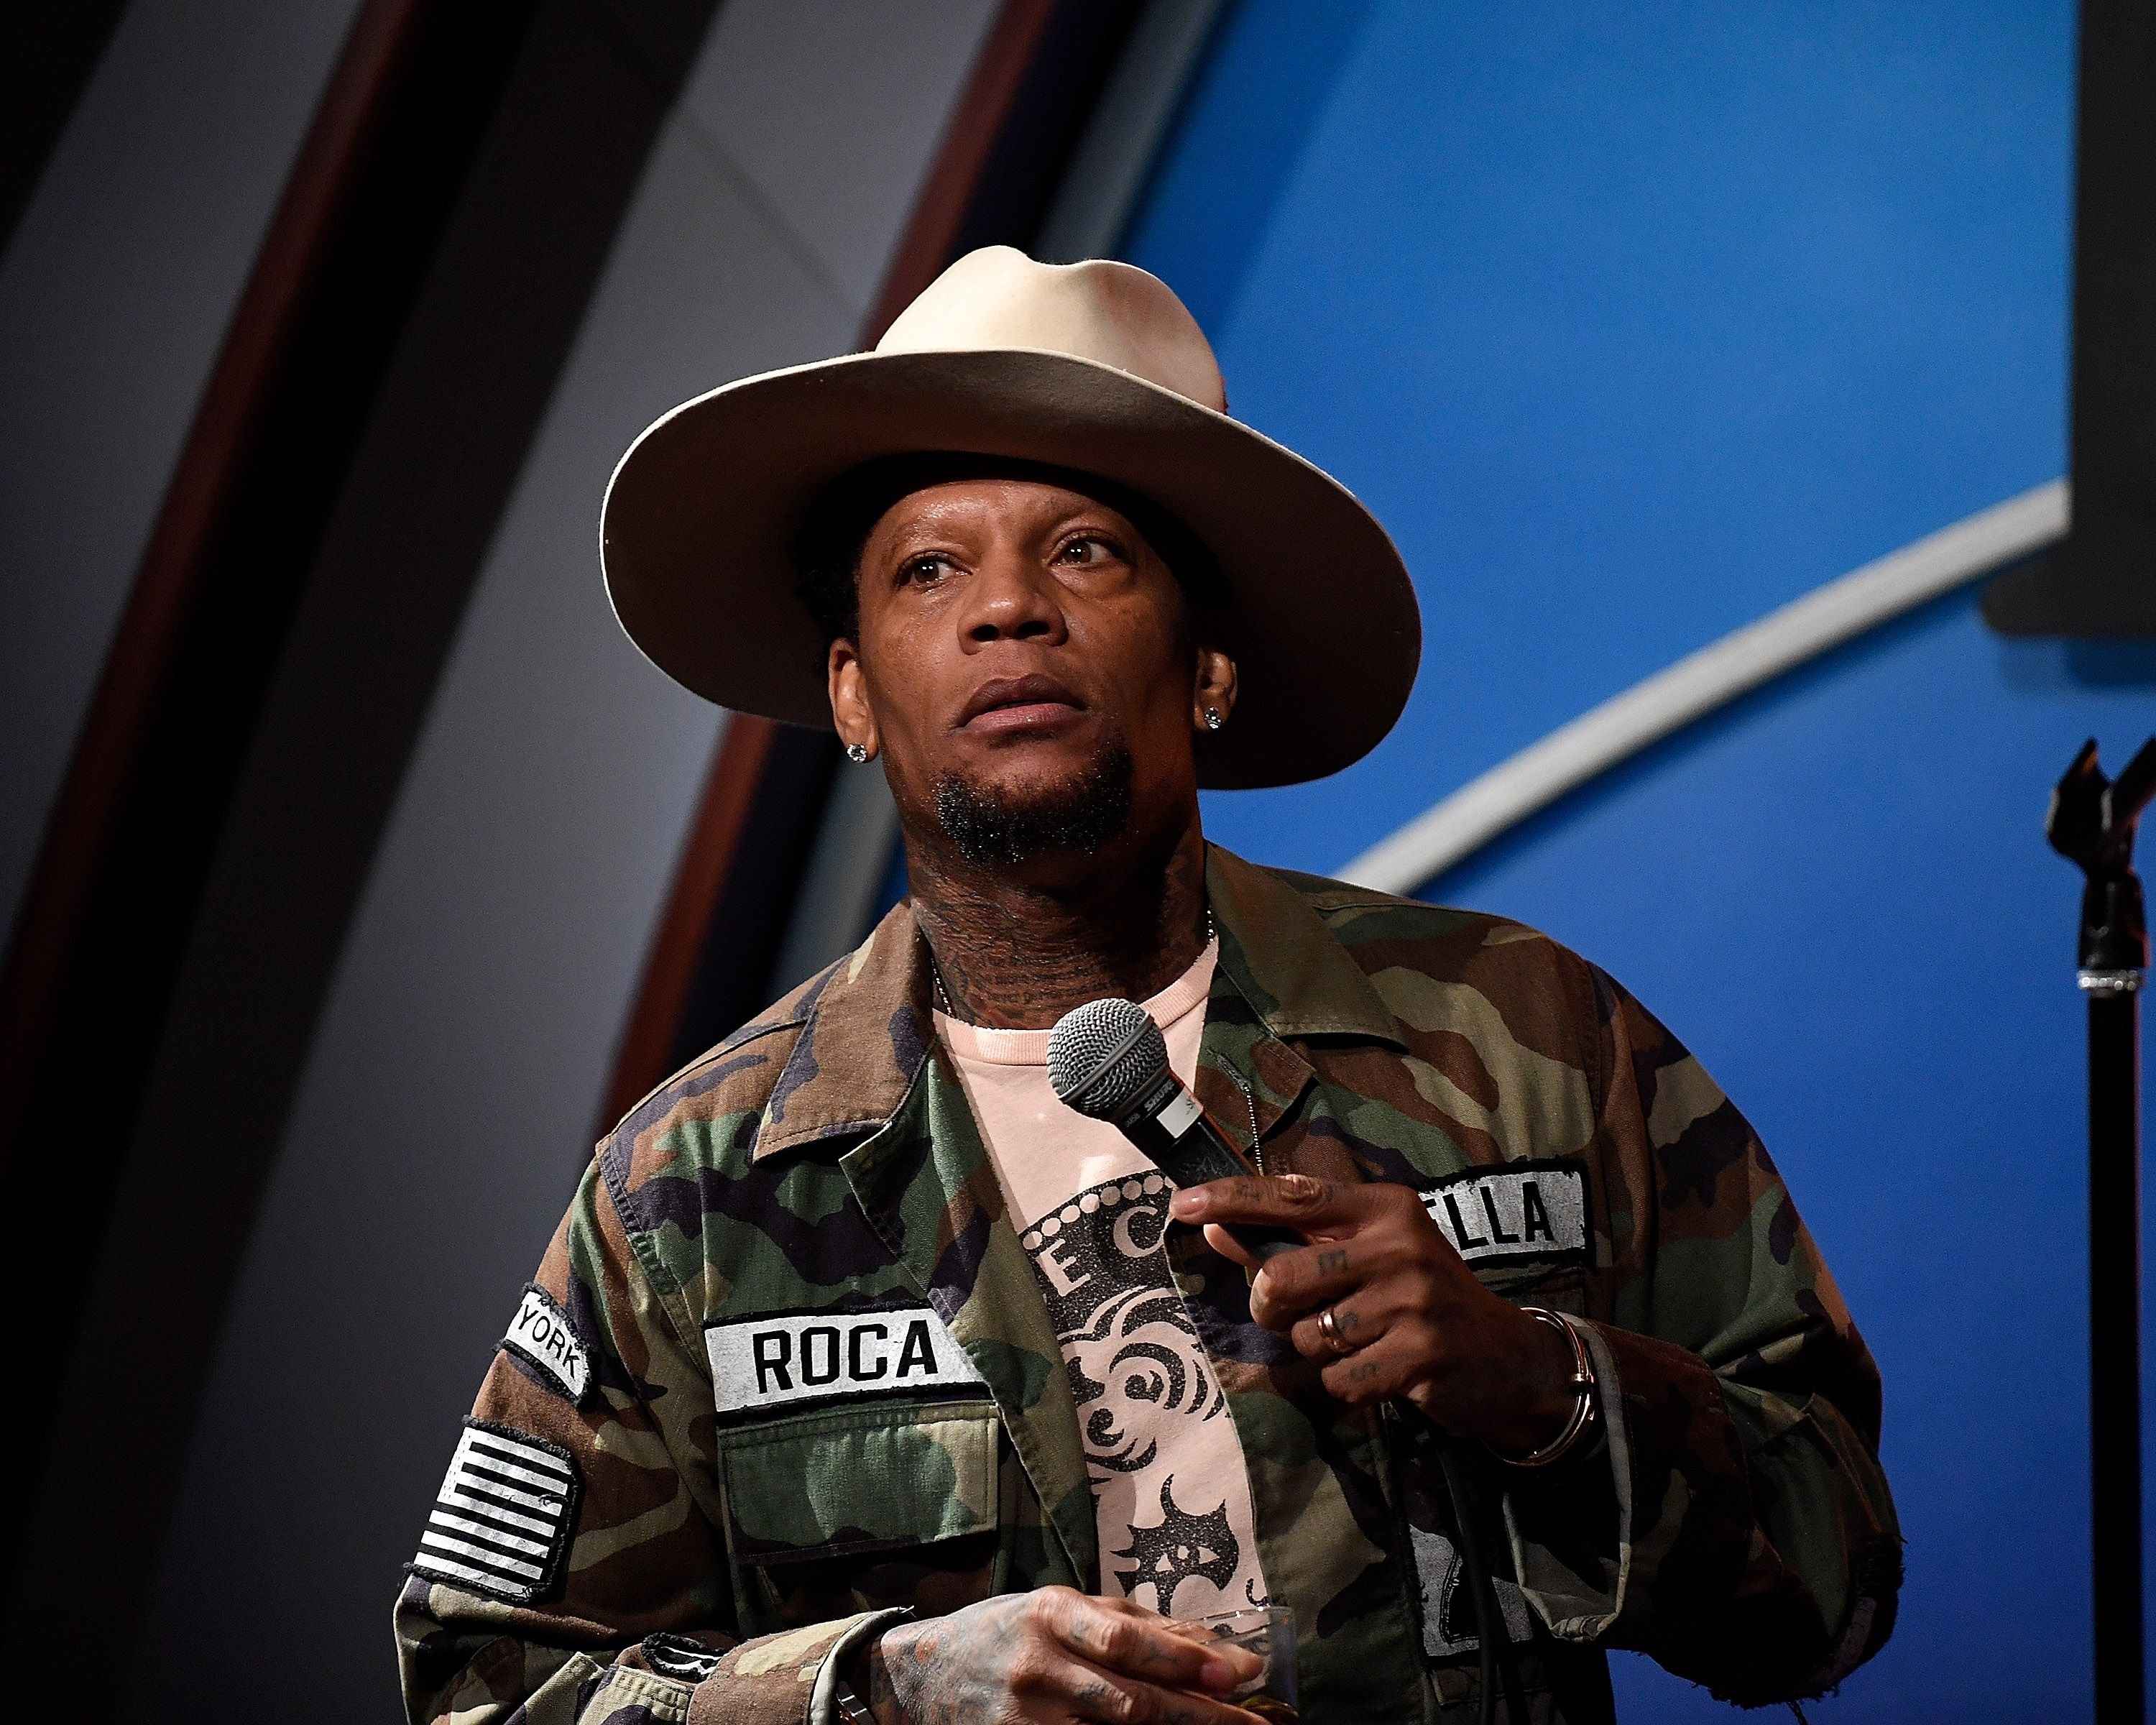 D.L. Hughley at the Sarcoma-Oma Foundation Comedy Benefit at The Laugh Factory on June 6, 2018 in West Hollywood, California. | Source: Getty Images